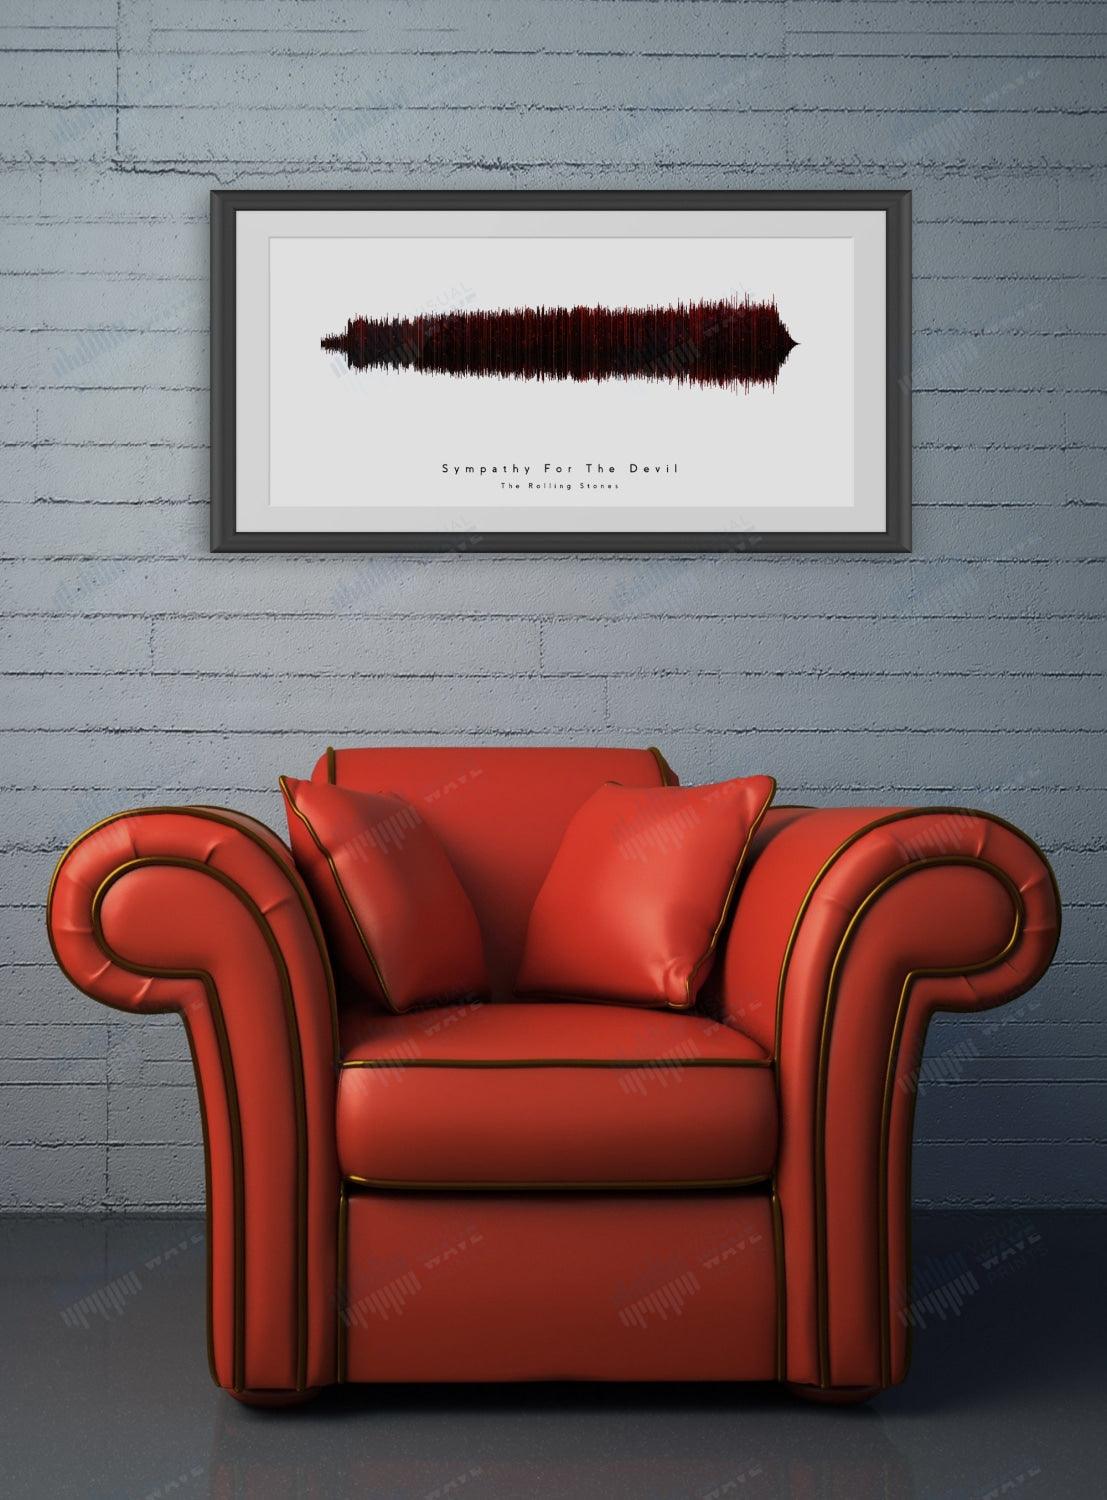 Sympathy for the Devil by The Rolling Stones - Visual Wave Prints